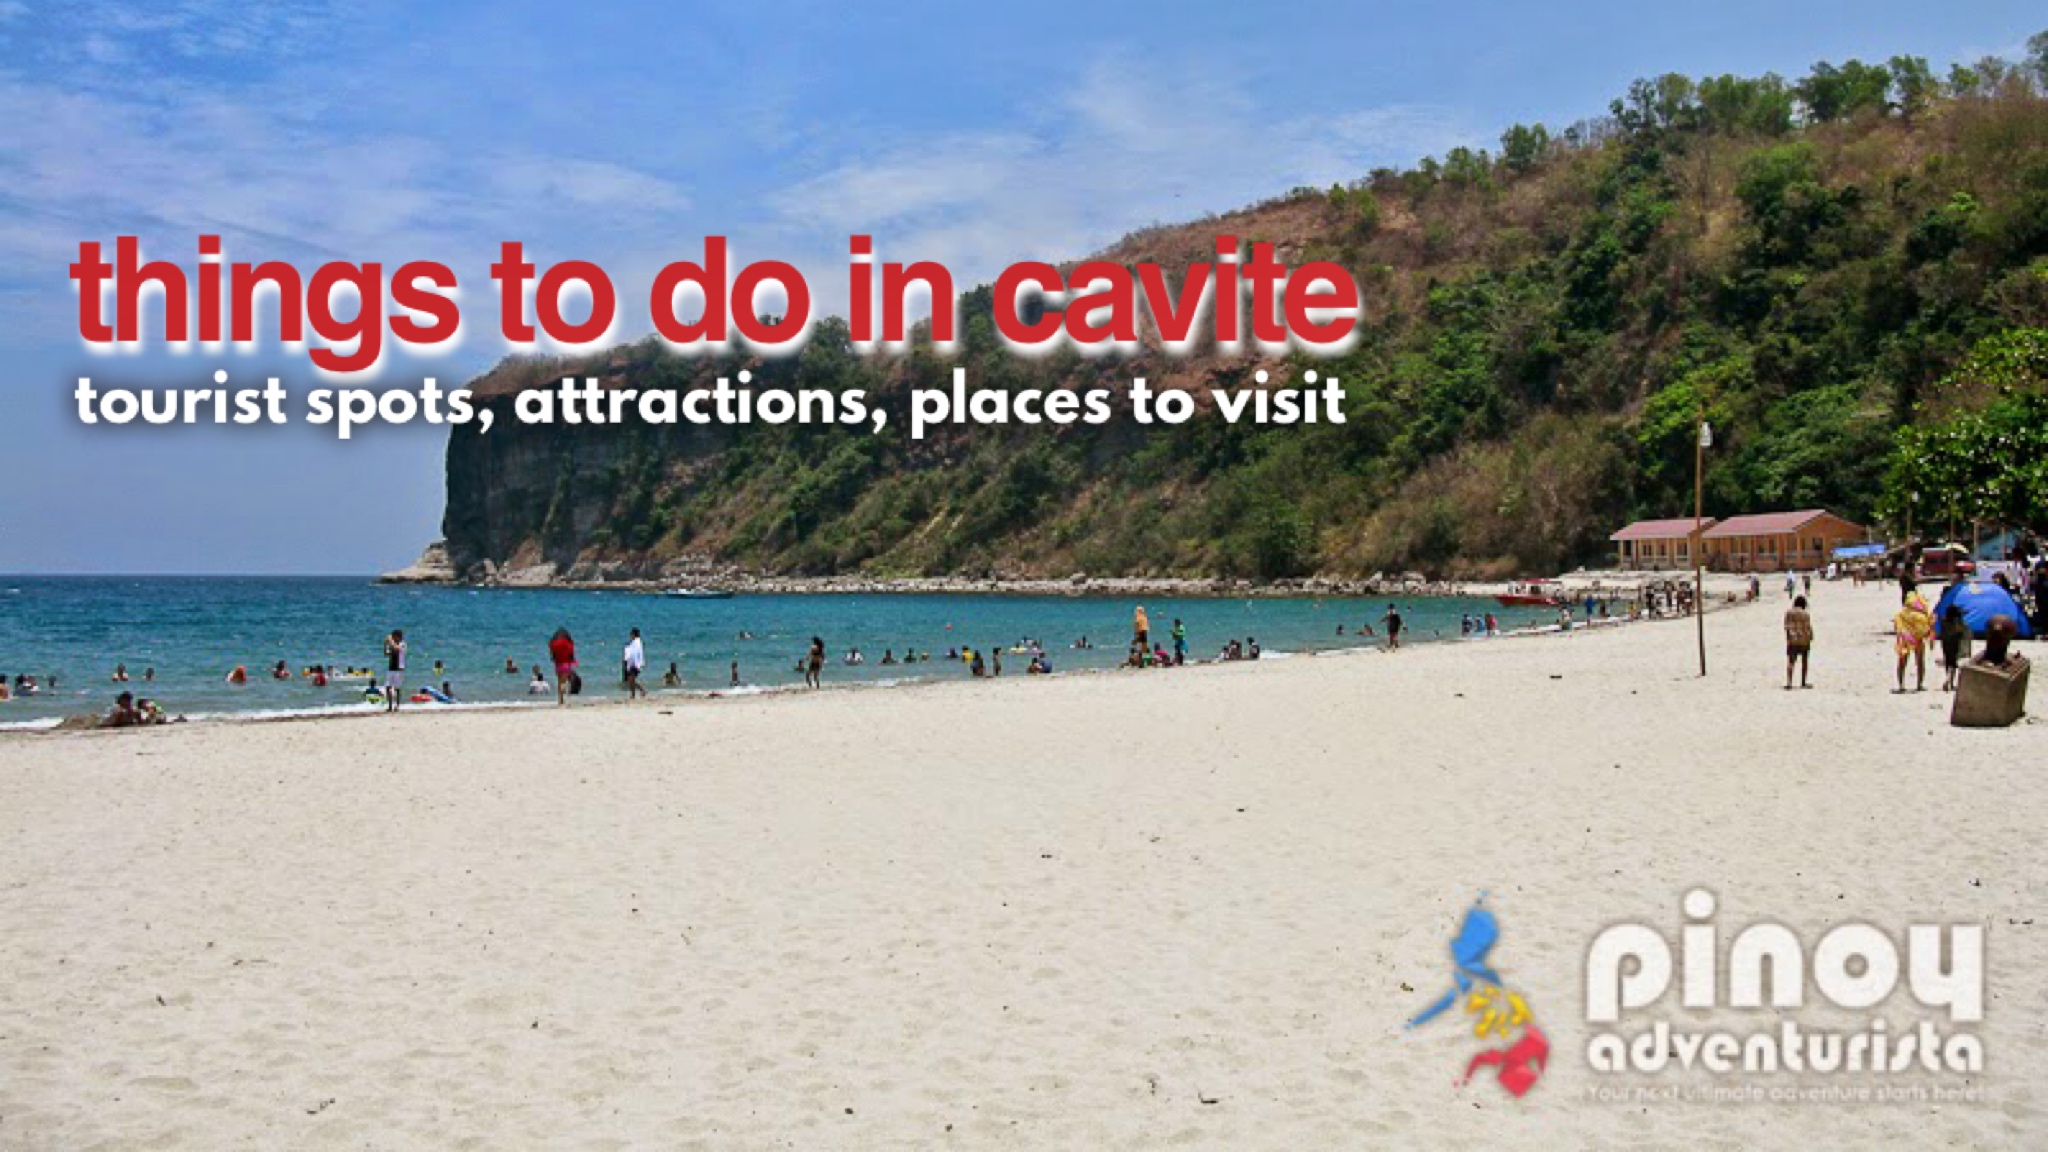 CAVITE ITINERARY: 30 Best CAVITE TOURIST SPOTS and Things to Do (Travel  Guide Blog 2023 for First-timers) | Blogs, Travel Guides, Things to Do,  Tourist Spots, DIY Itinerary, Hotel Reviews - Pinoy Adventurista